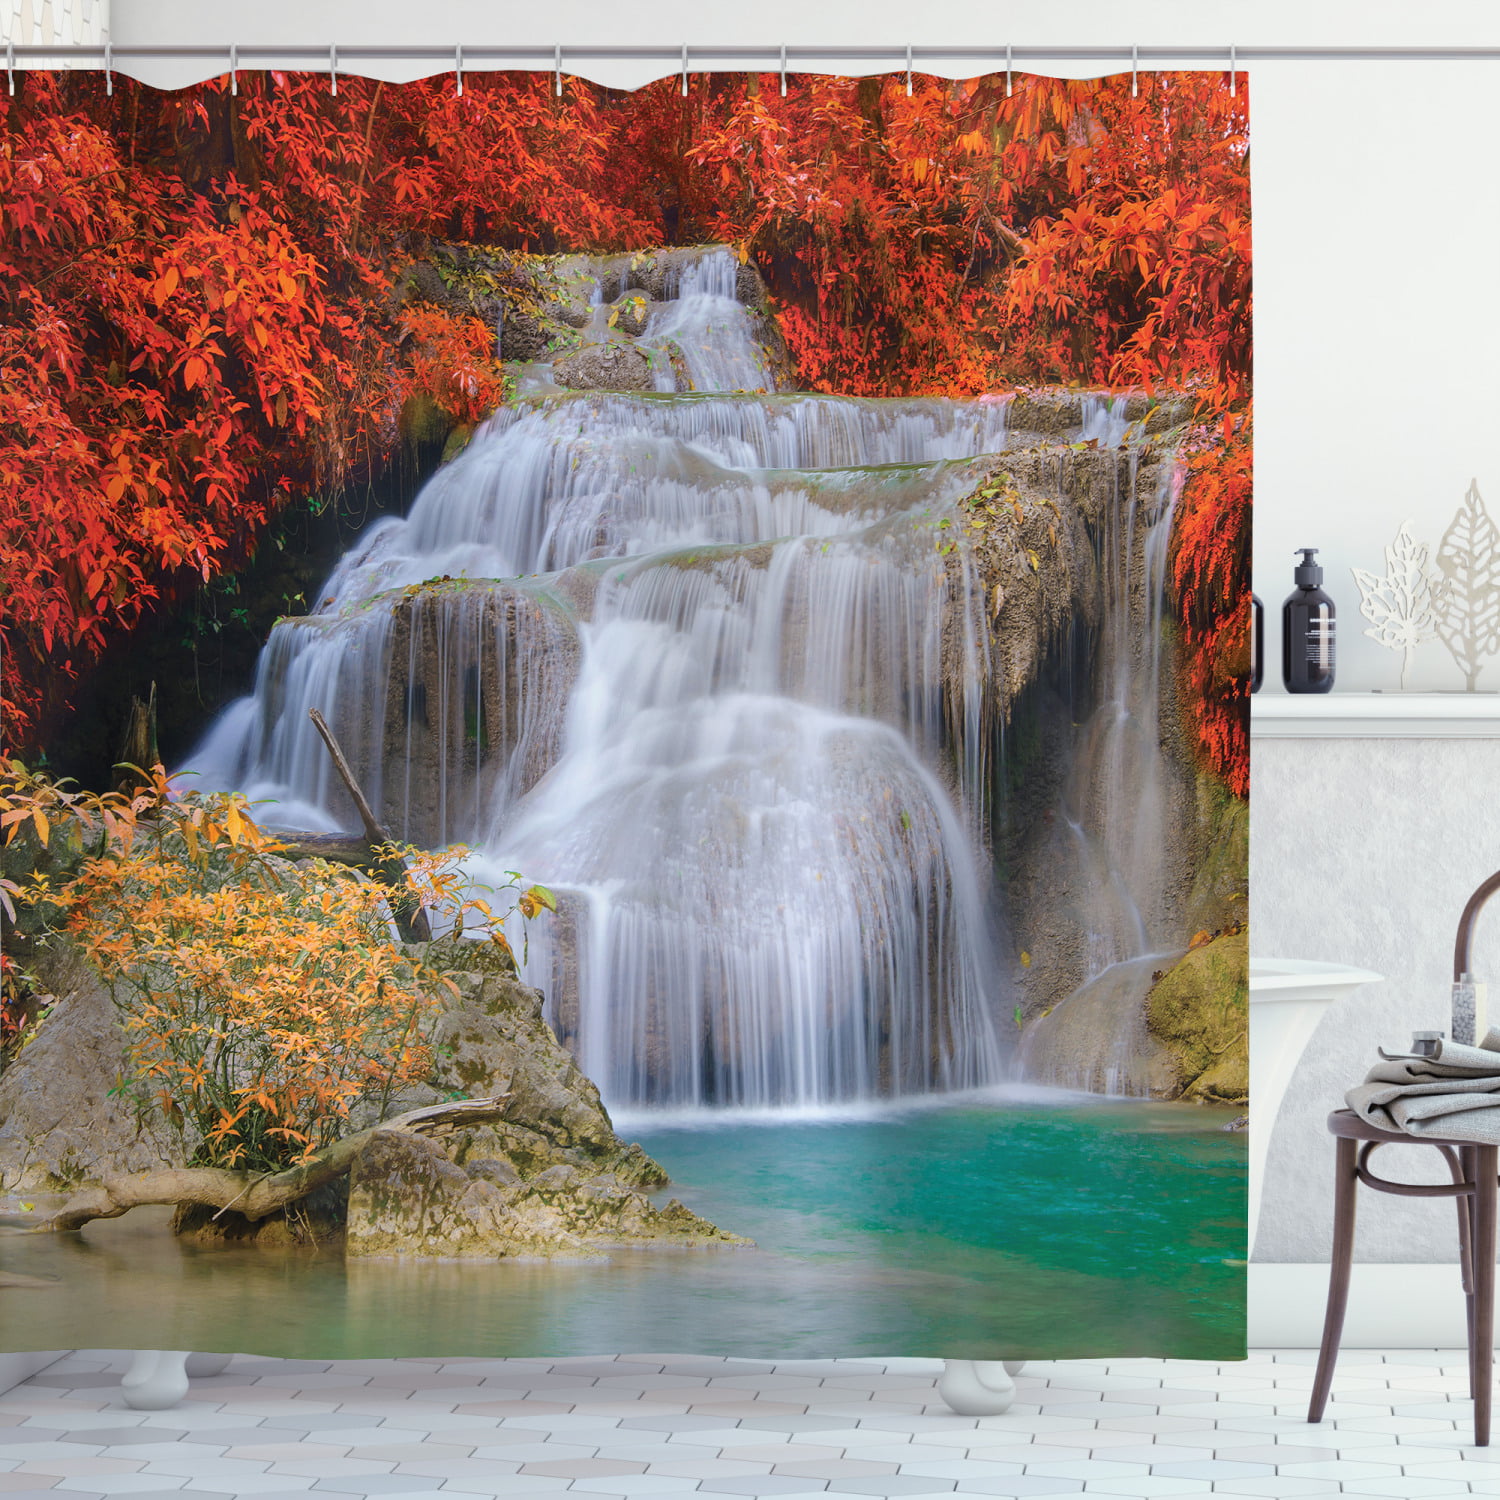 Landscape Shower Curtain Lake House in Autumn Print for Bathroom 70 Inches Long 